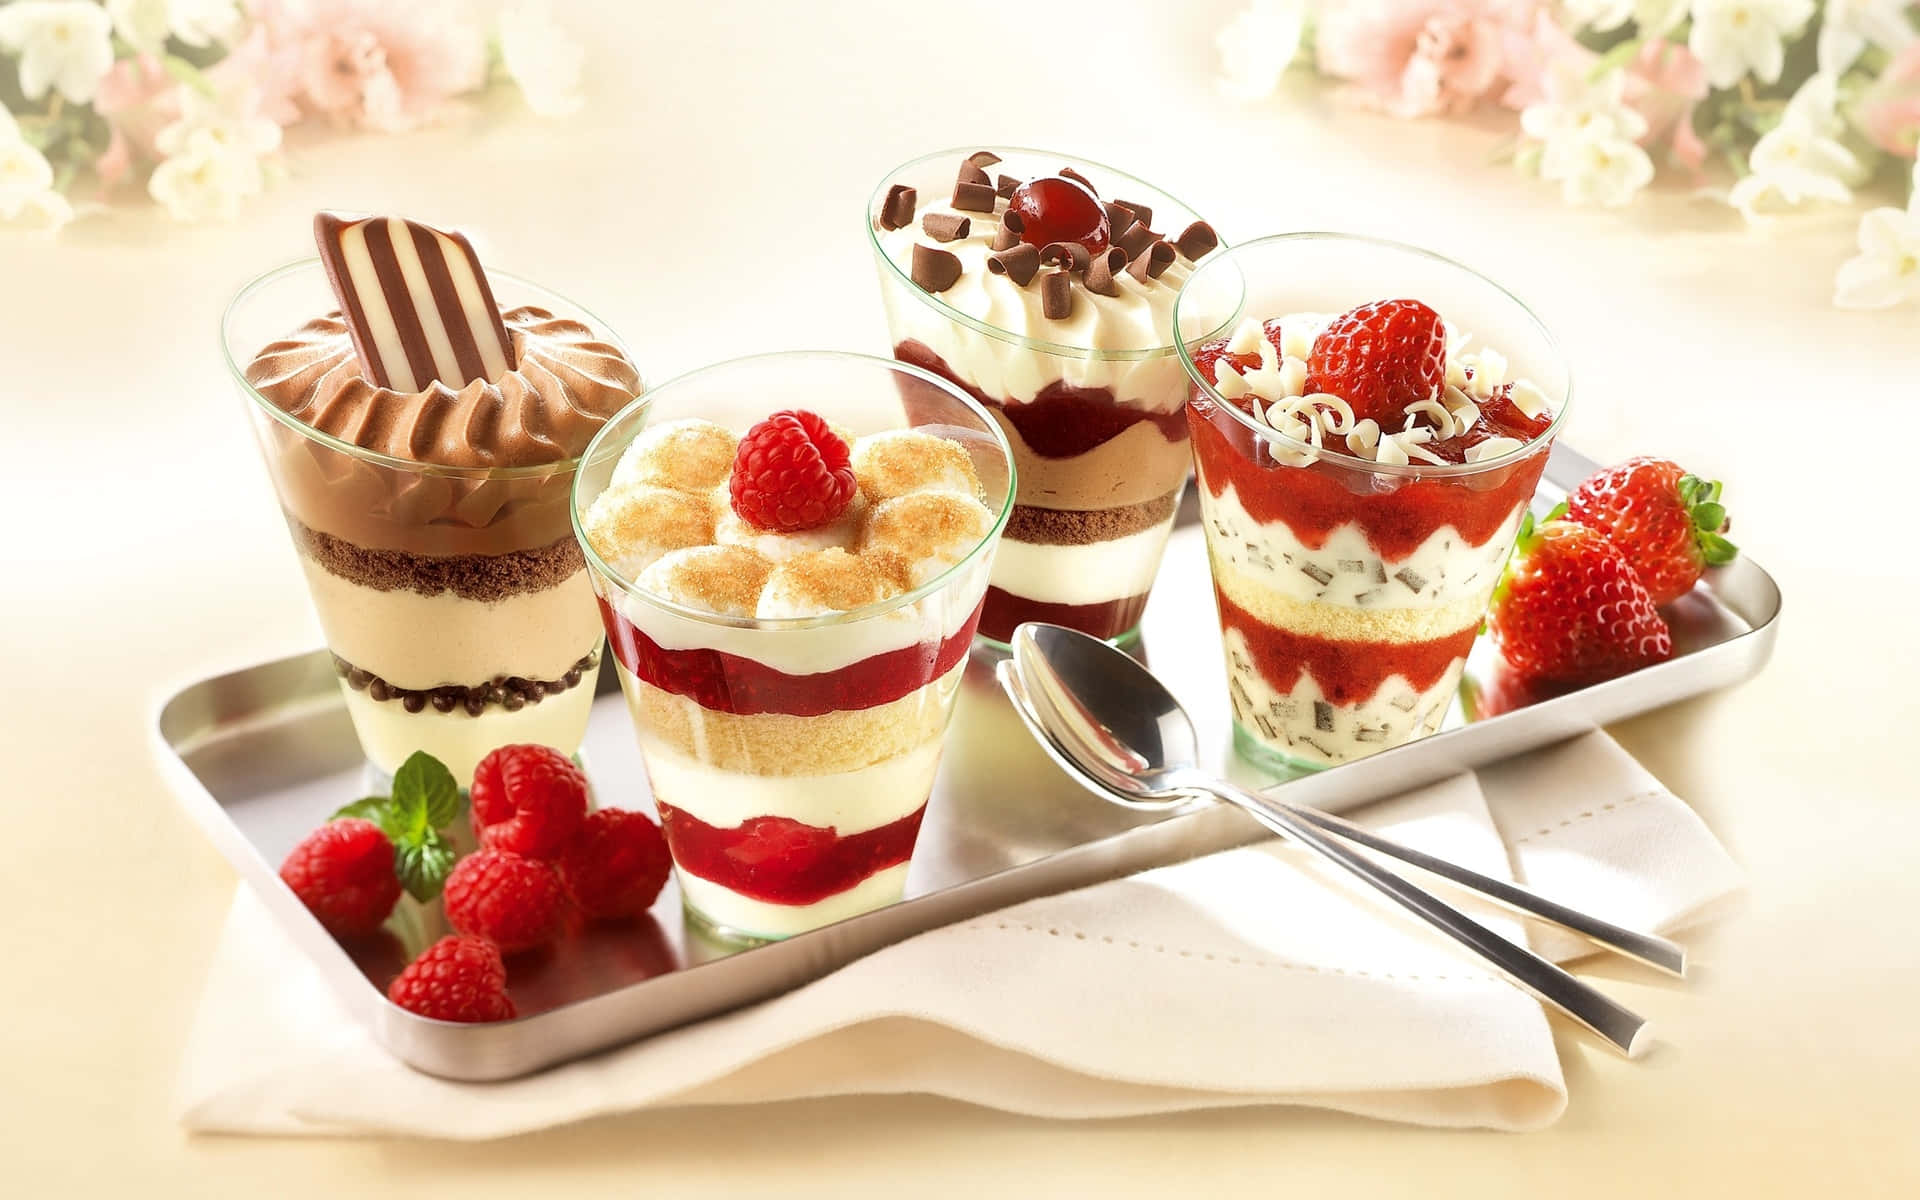 A Tray Of Desserts With Strawberries And Cream